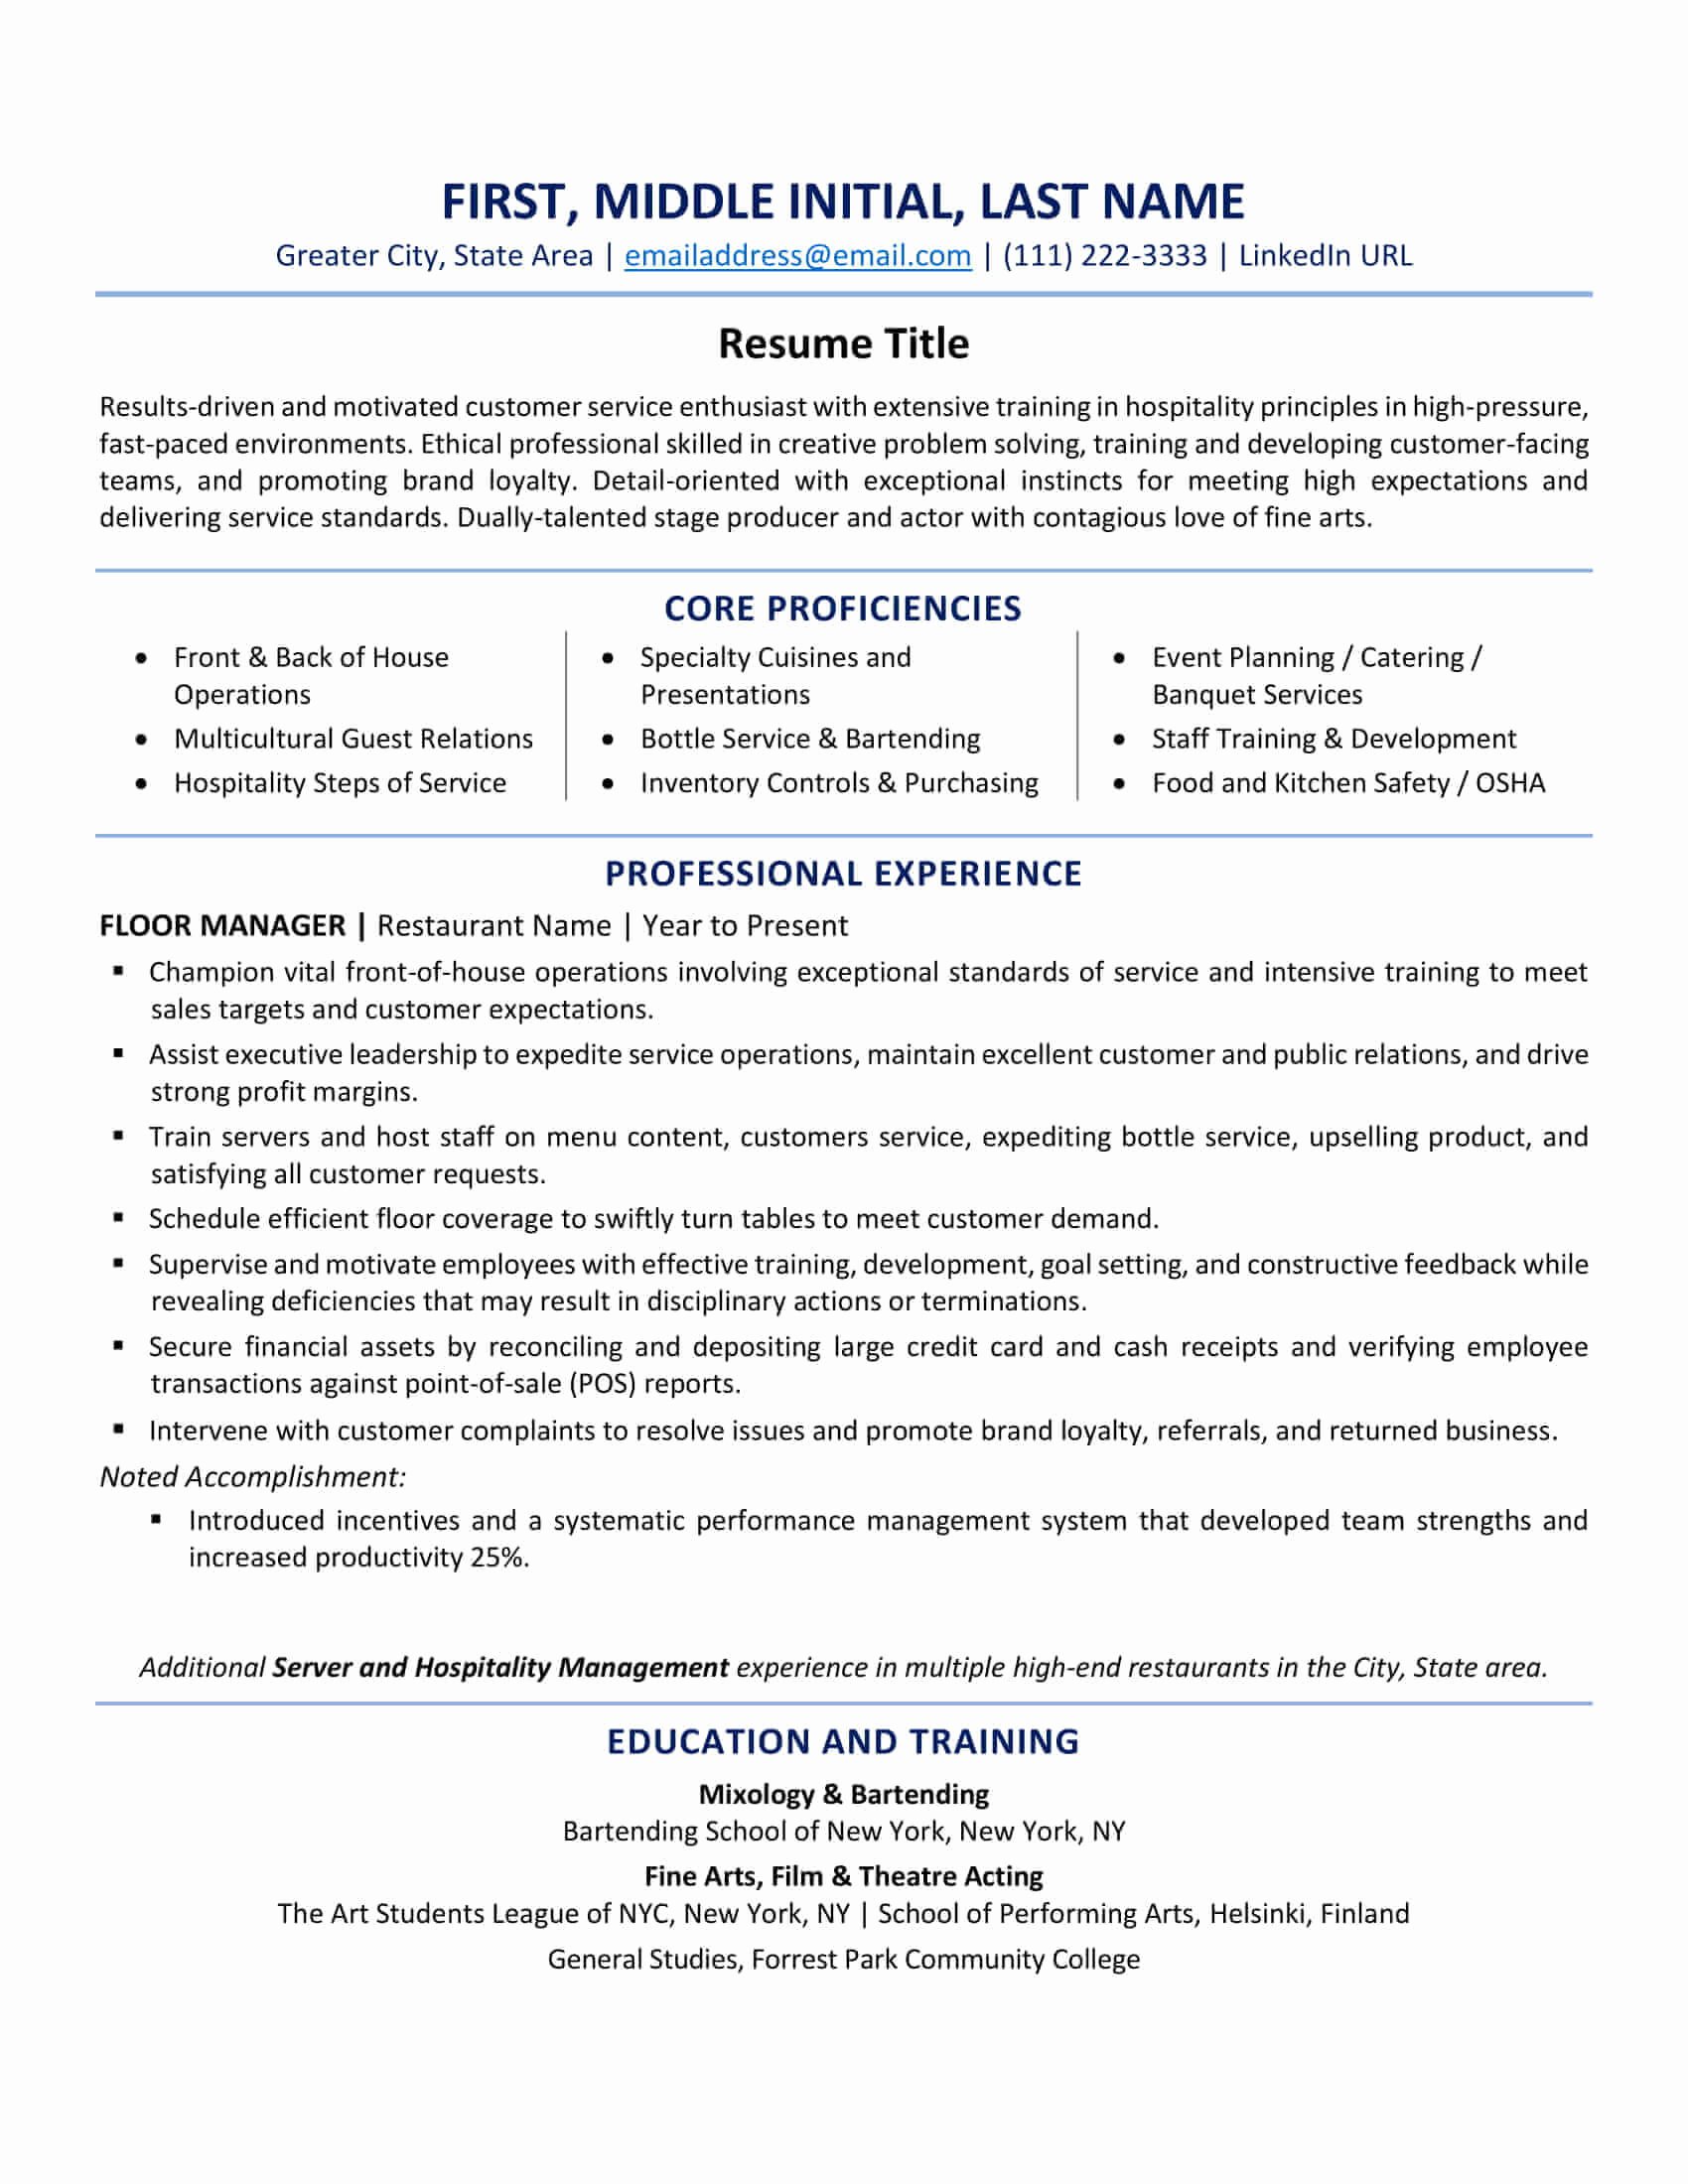 Usa Jobs Sample Resume Fresh How to Quickly Find A Job when Moving to the Usa 5 Tips